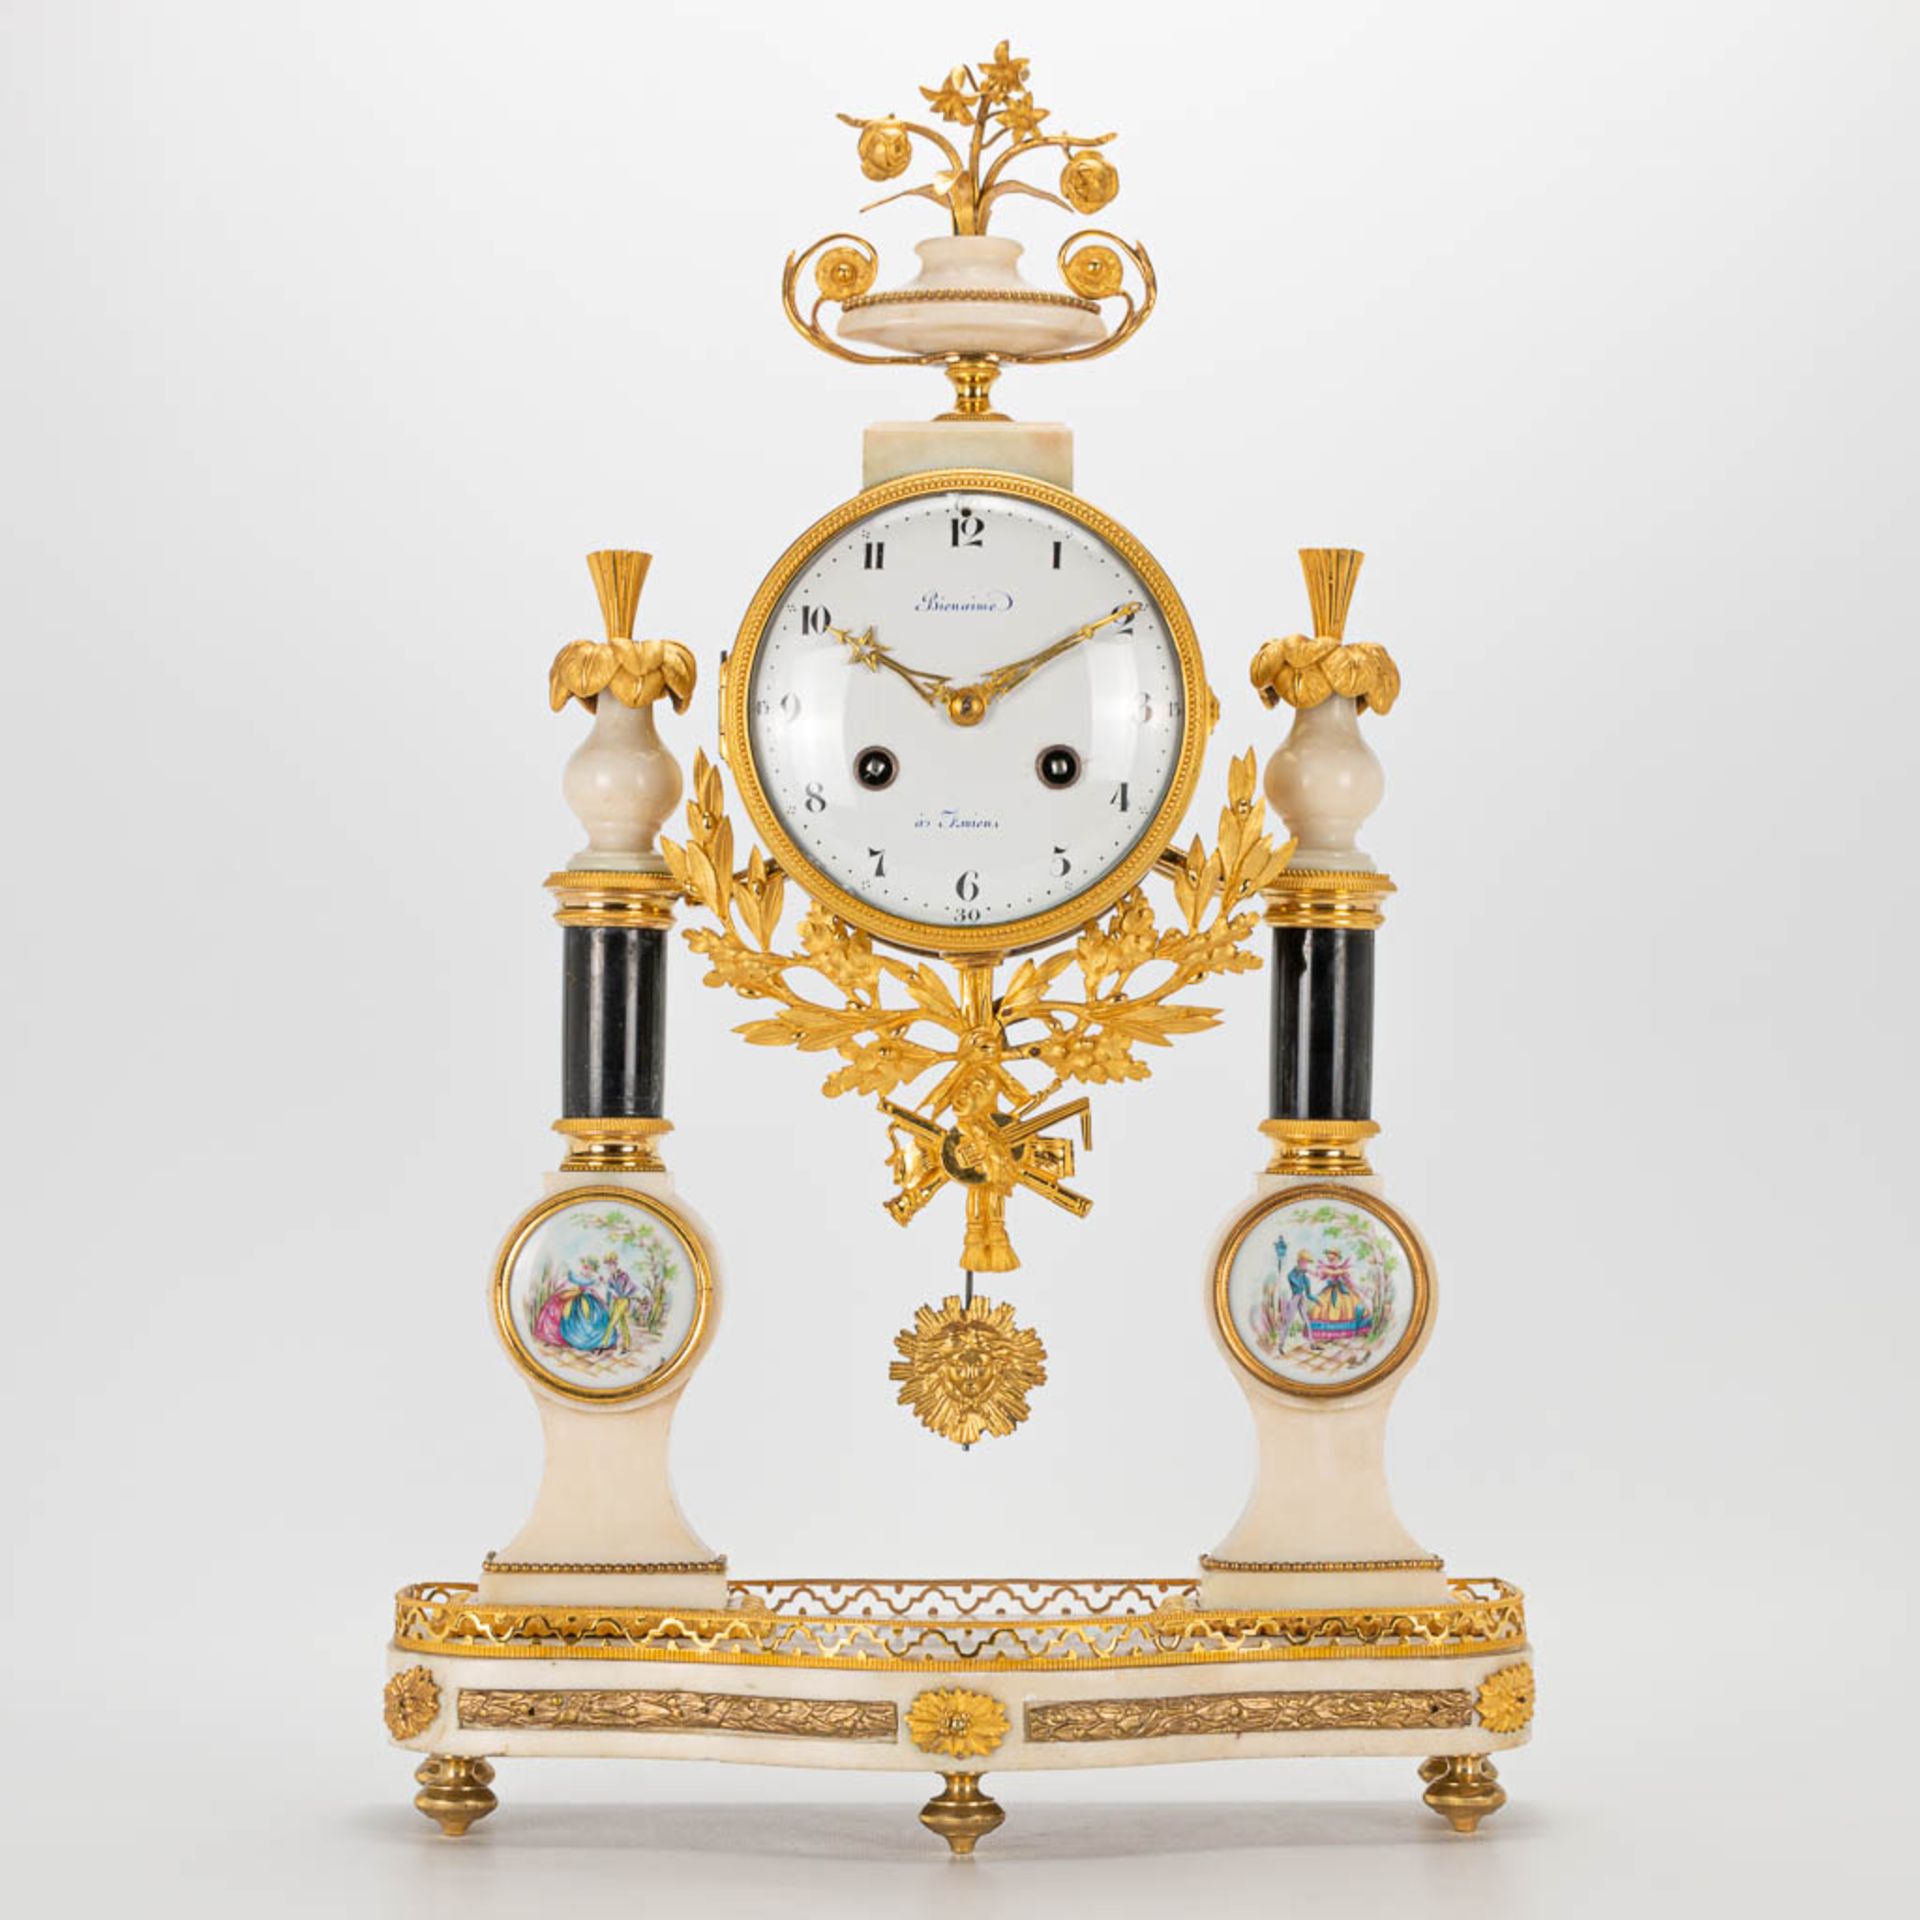 A Louis XVI style column clock made of bronze and marble, with handpainted Limoges plaques and marke